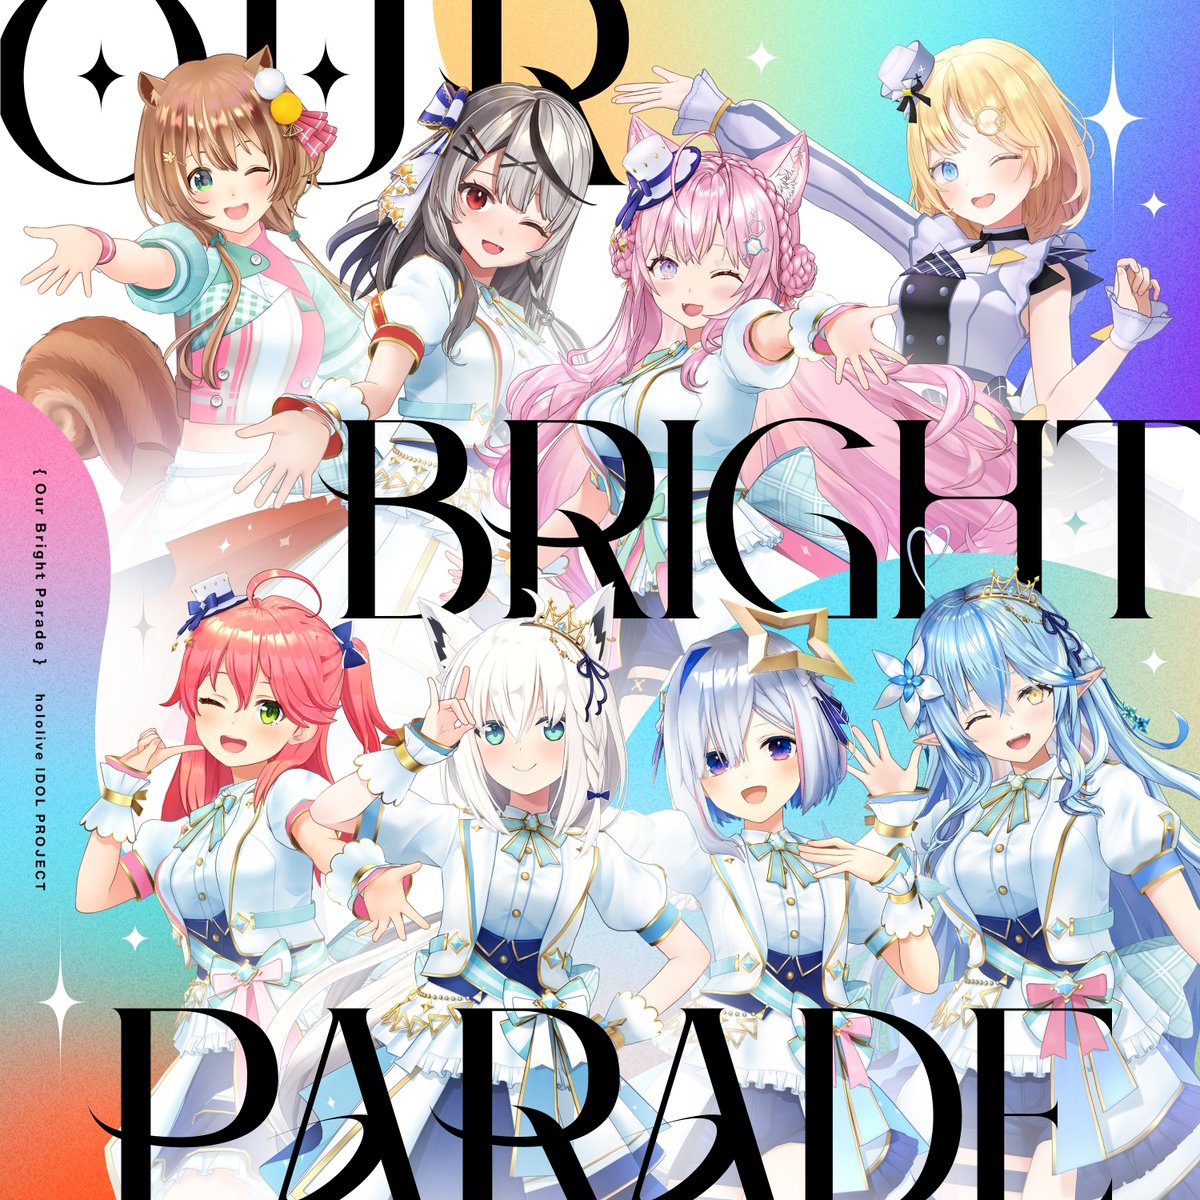 『hololive IDOL PROJECT - Our Bright Parade』収録の『Our Bright Parade』ジャケット